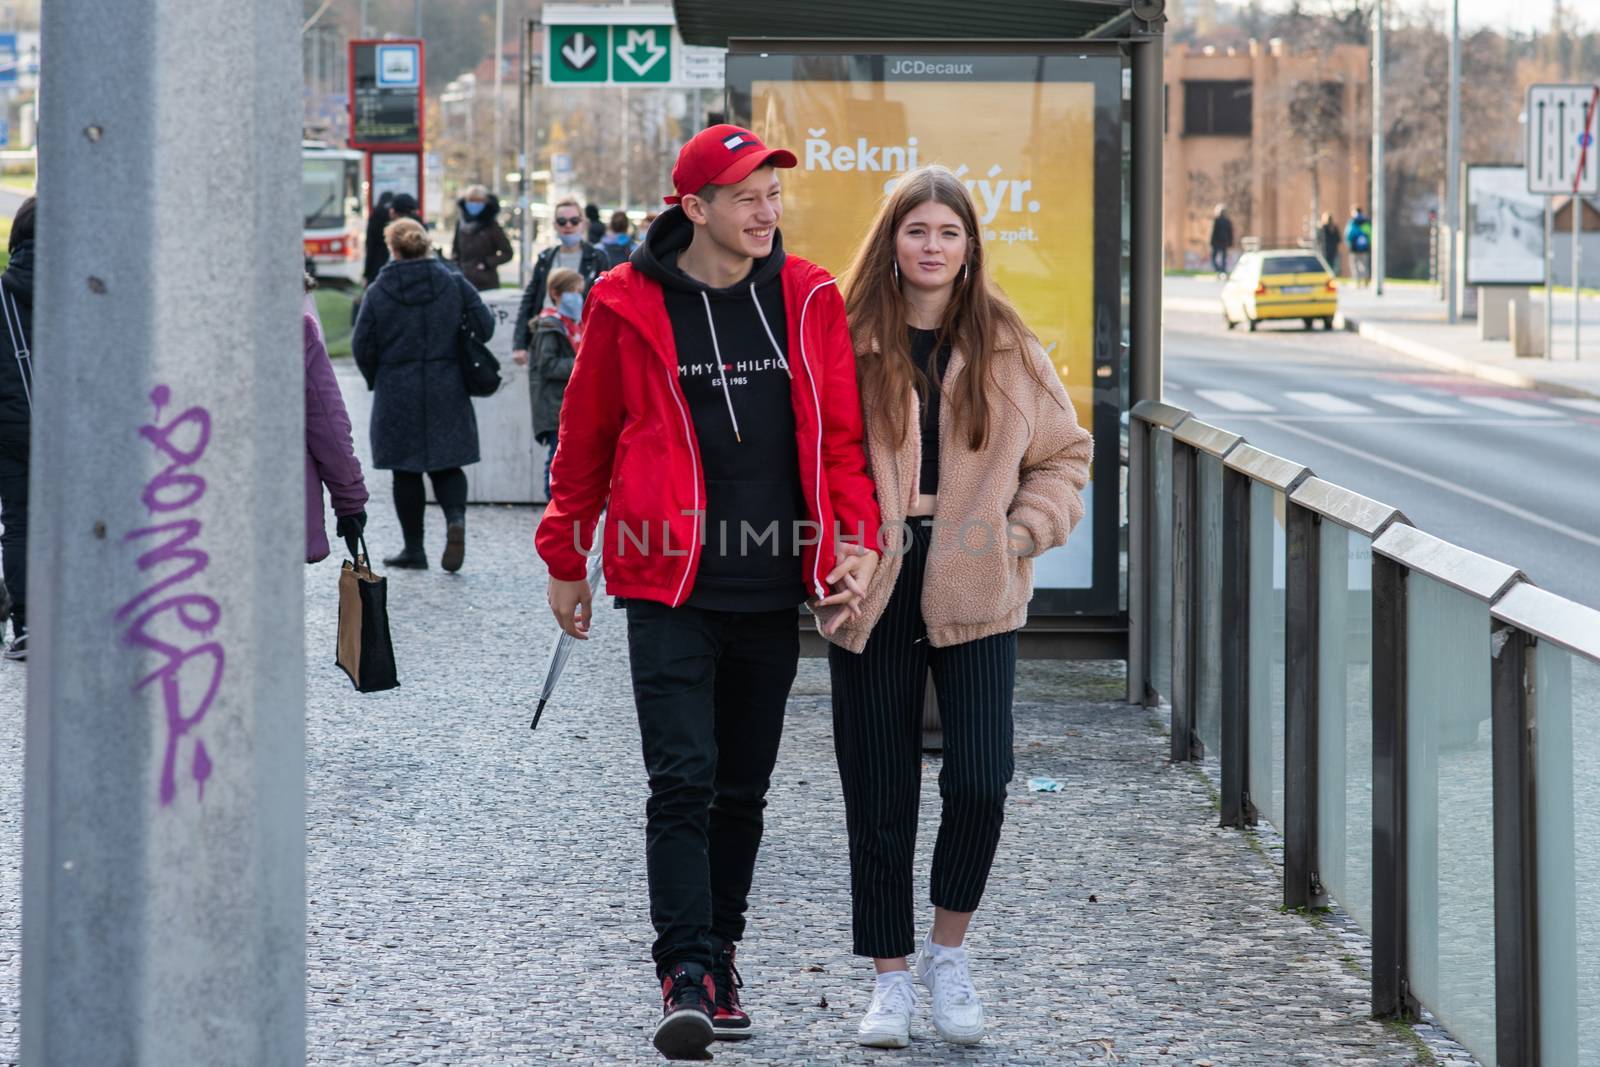 11/16/20. Czech Republic. A young couple are waiting for a tram at Hradcanska tram stop during quarantine. by gonzalobell